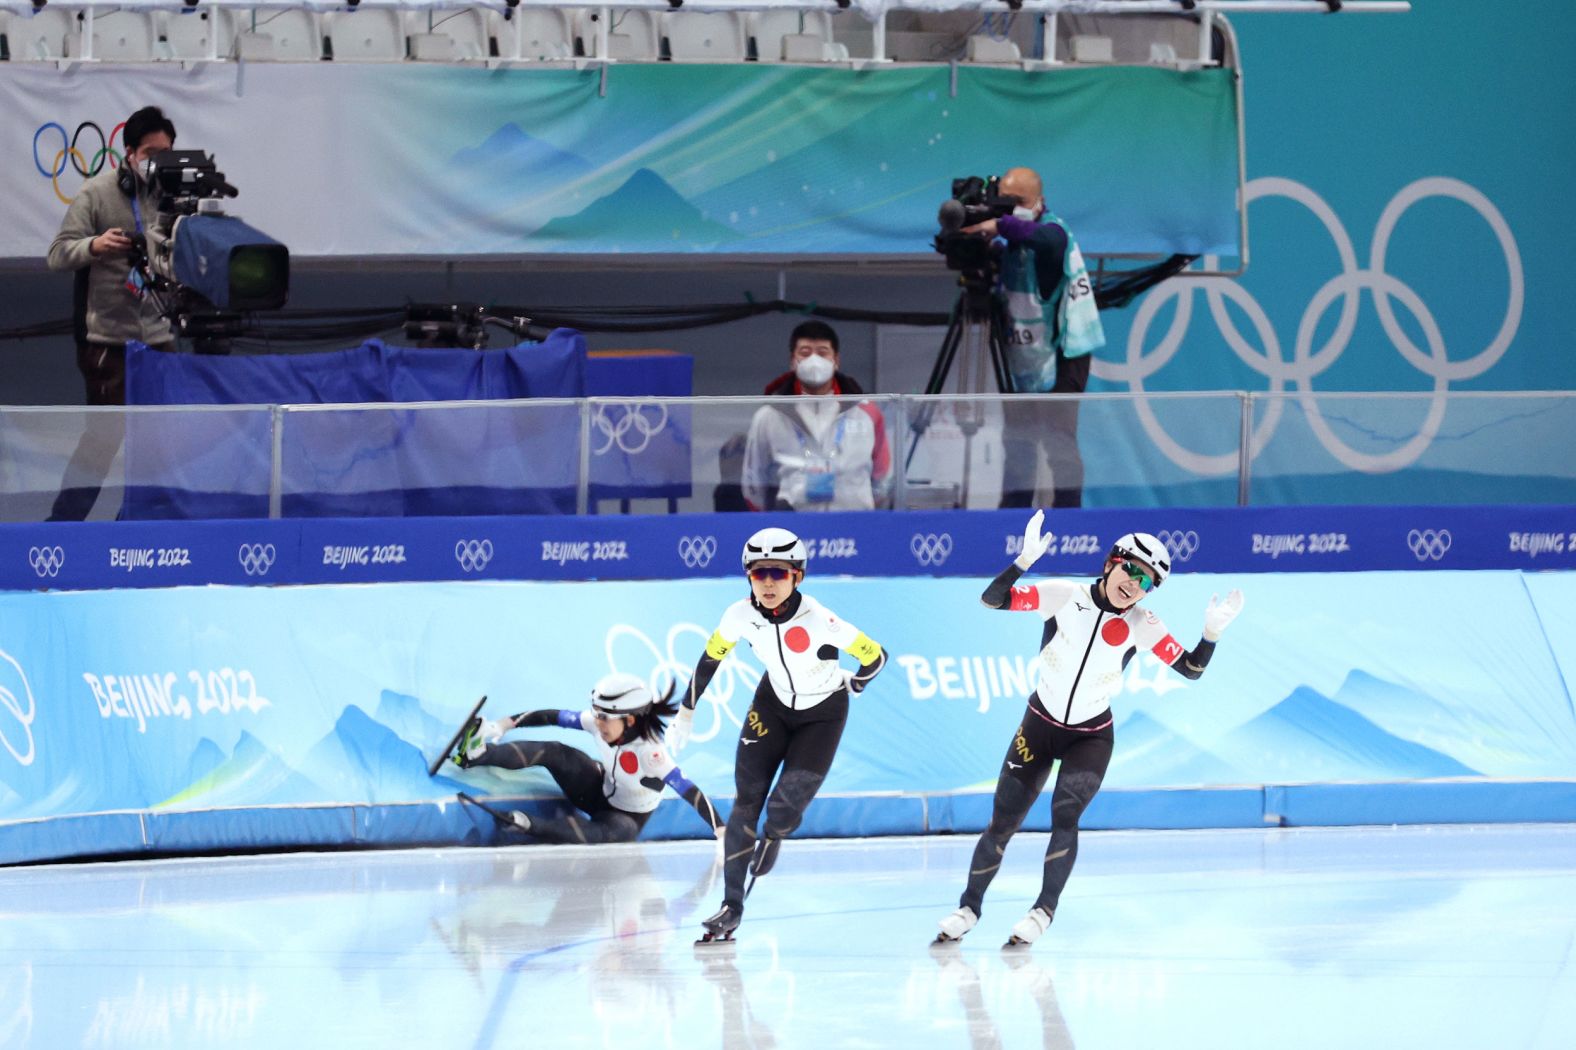 Japanese speedskaters react as teammate Nana Takagi <a href="index.php?page=&url=https%3A%2F%2Fwww.cnn.com%2Fworld%2Flive-news%2Fbeijing-winter-olympics-02-15-22-spt%2Fh_22cc2cf17a44ce79d6c03b3aa6a7155f" target="_blank">crashes during the team pursuit final</a> on February 15. Japan was leading Canada and looked on course to win the gold when Takagi got one of her blades caught in the ice on the final corner, causing her to fall and crash into the barriers. Japan finished with the silver.